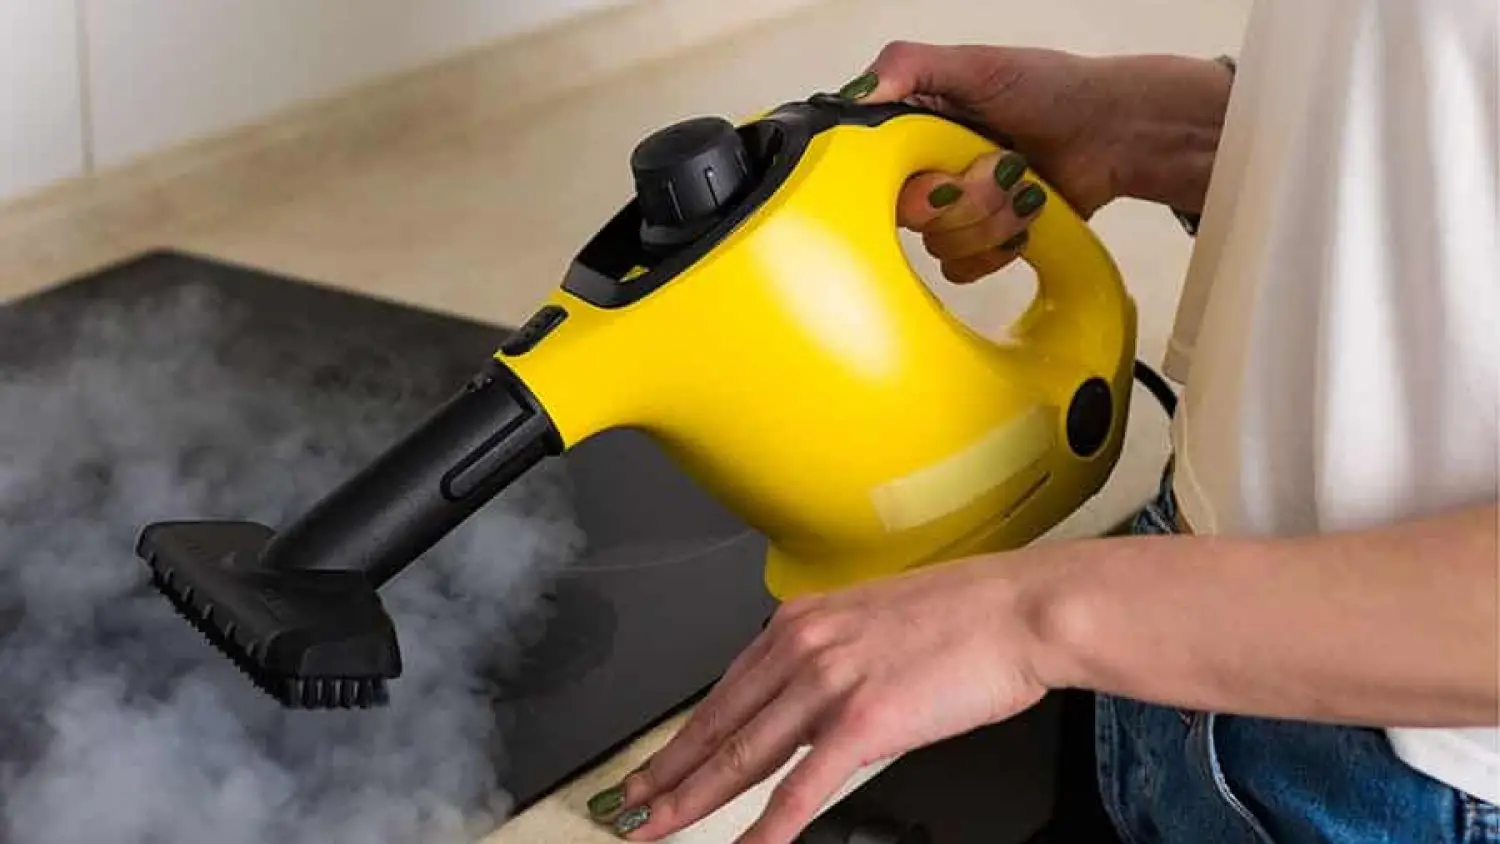 Best Steam Cleaners: 5 Popular Models That Will Make Cleaning Easier than Ever Before